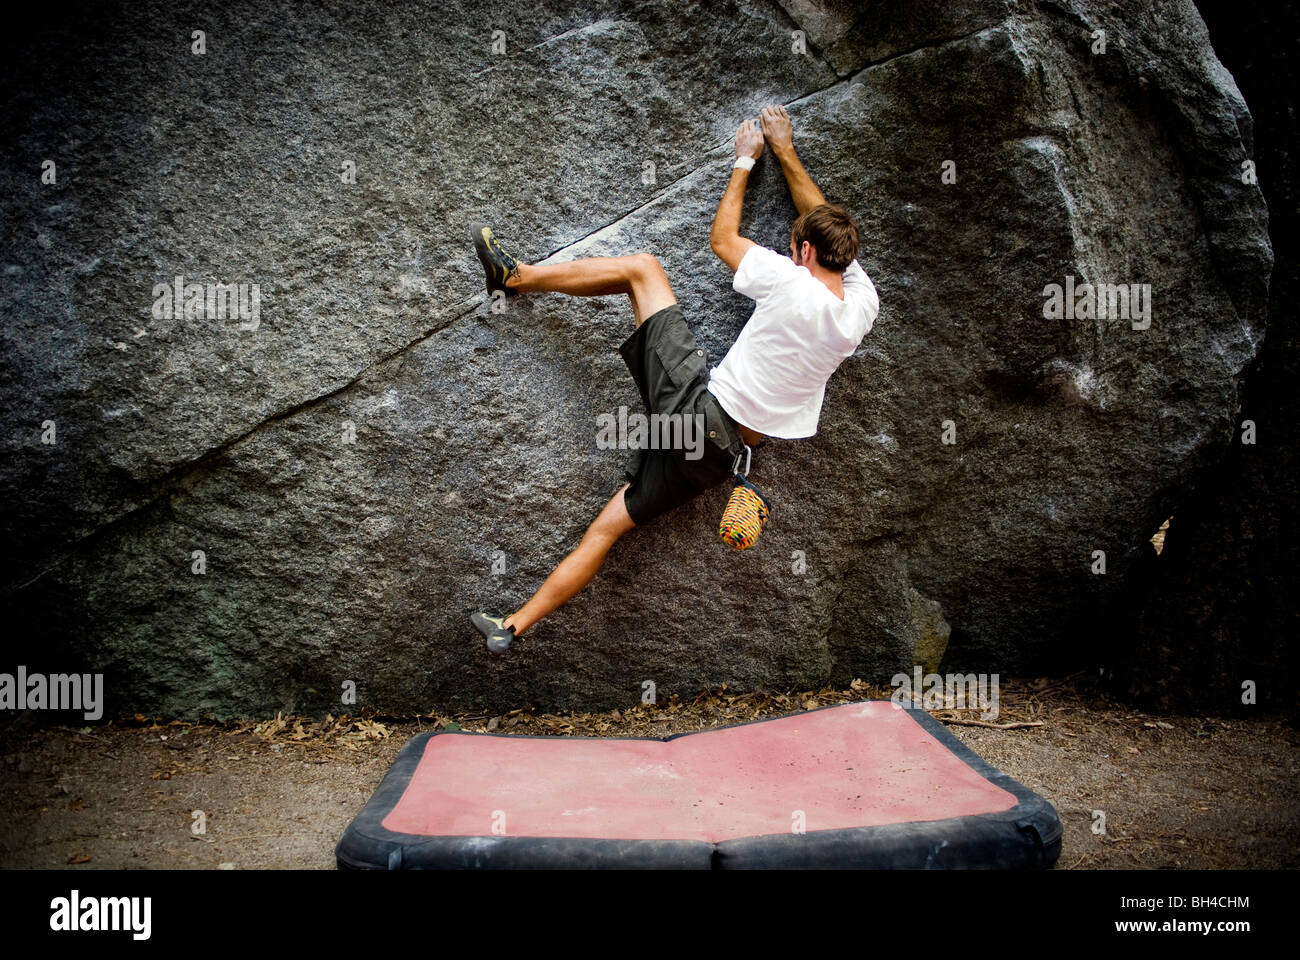 A young man's heal hooks a boulder located in Yosemite Valley, California. Stock Photo